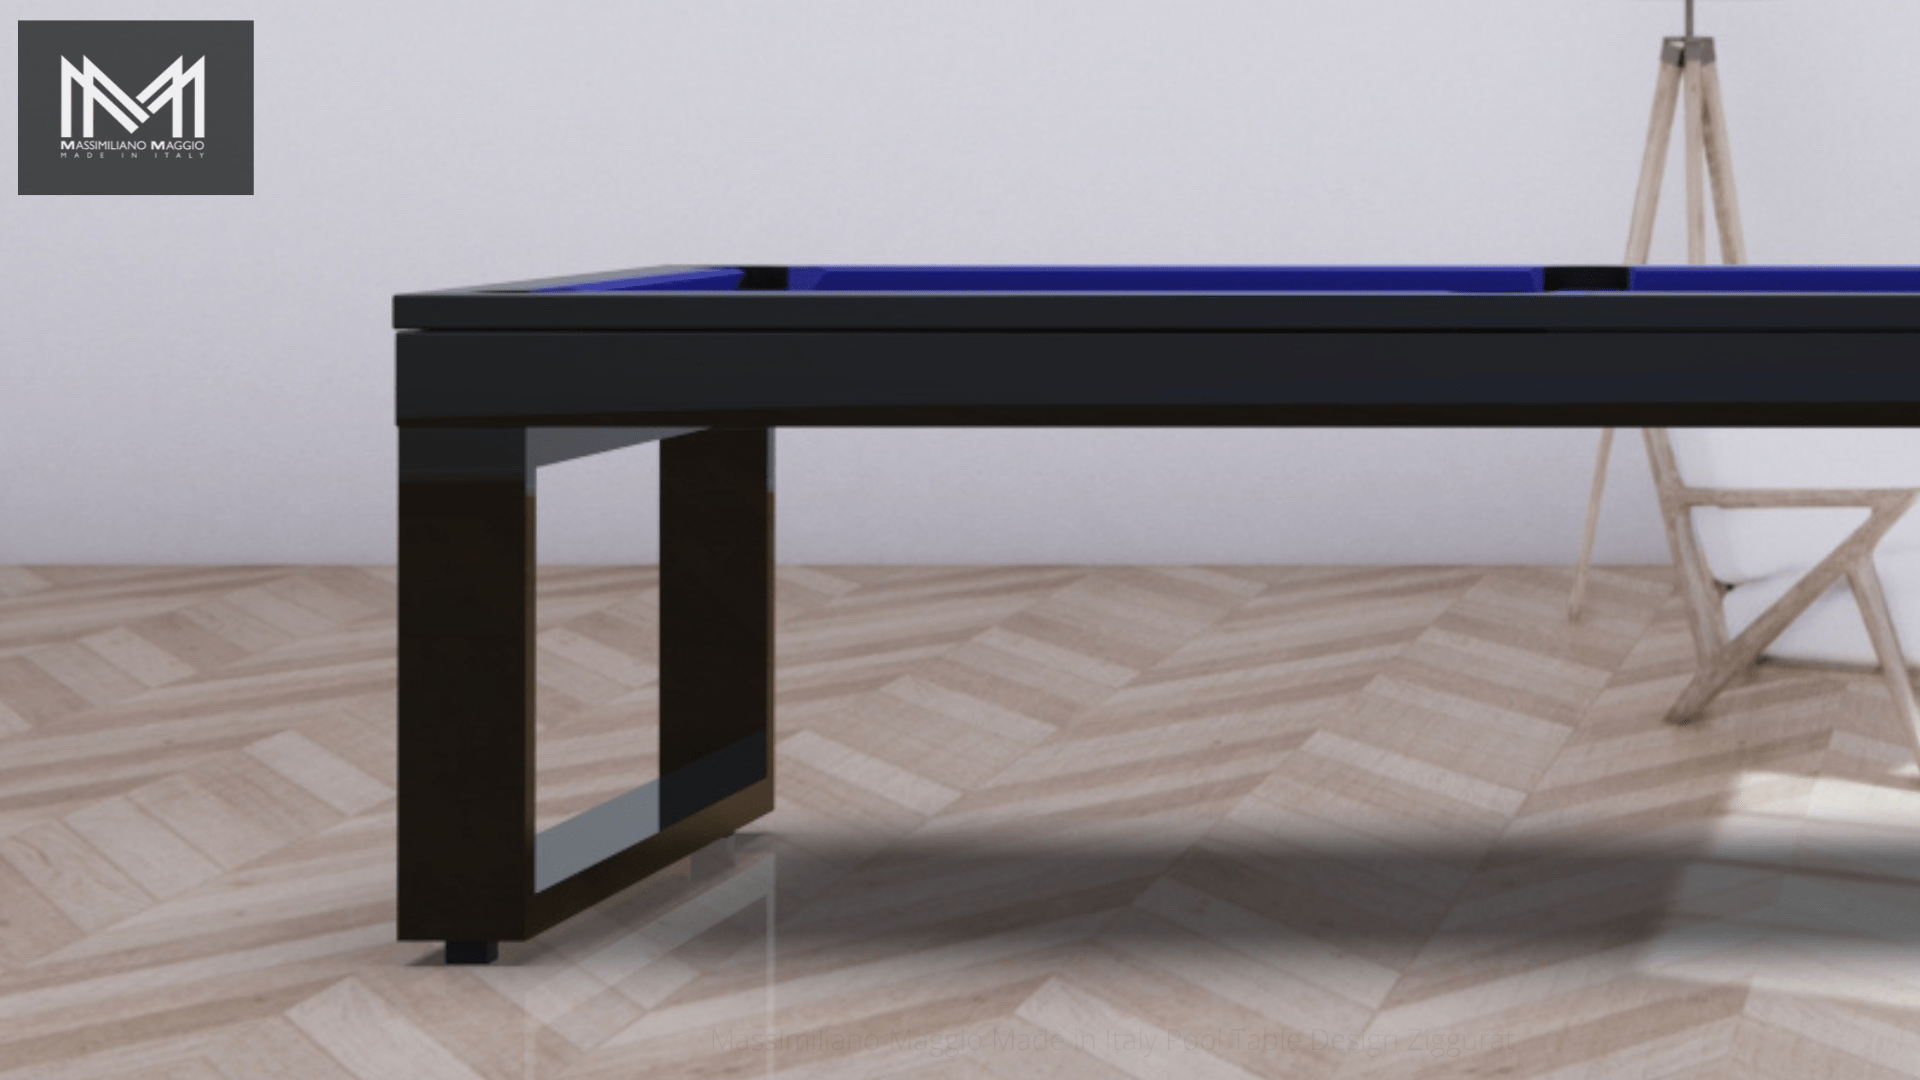 3 NEW Icon Exclusive Pool table by Massimiliano Maggio Made in Italy